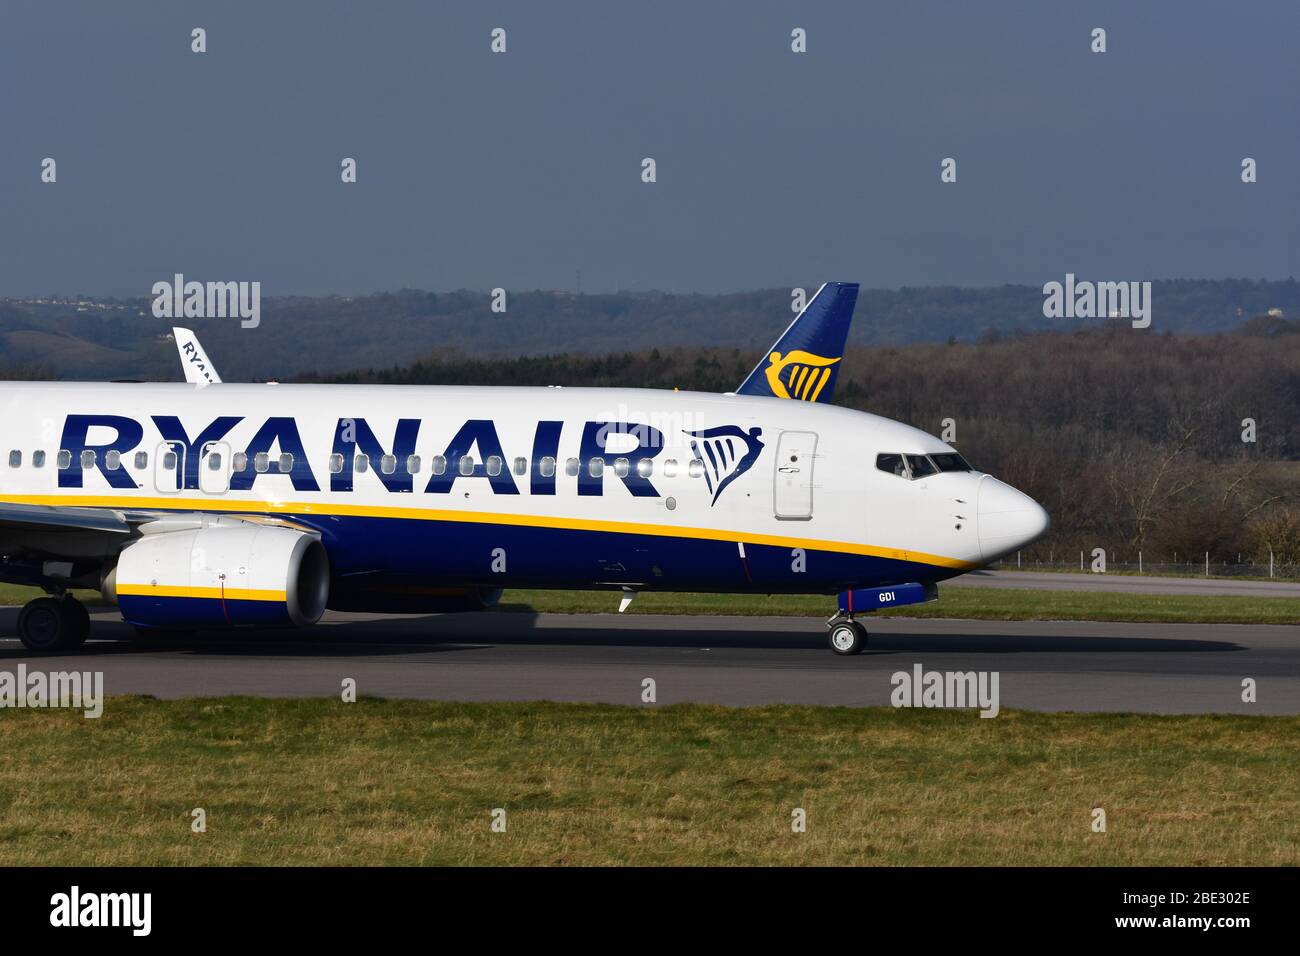 Ryanair Logo High Resolution Stock Photography and Images - Alamy